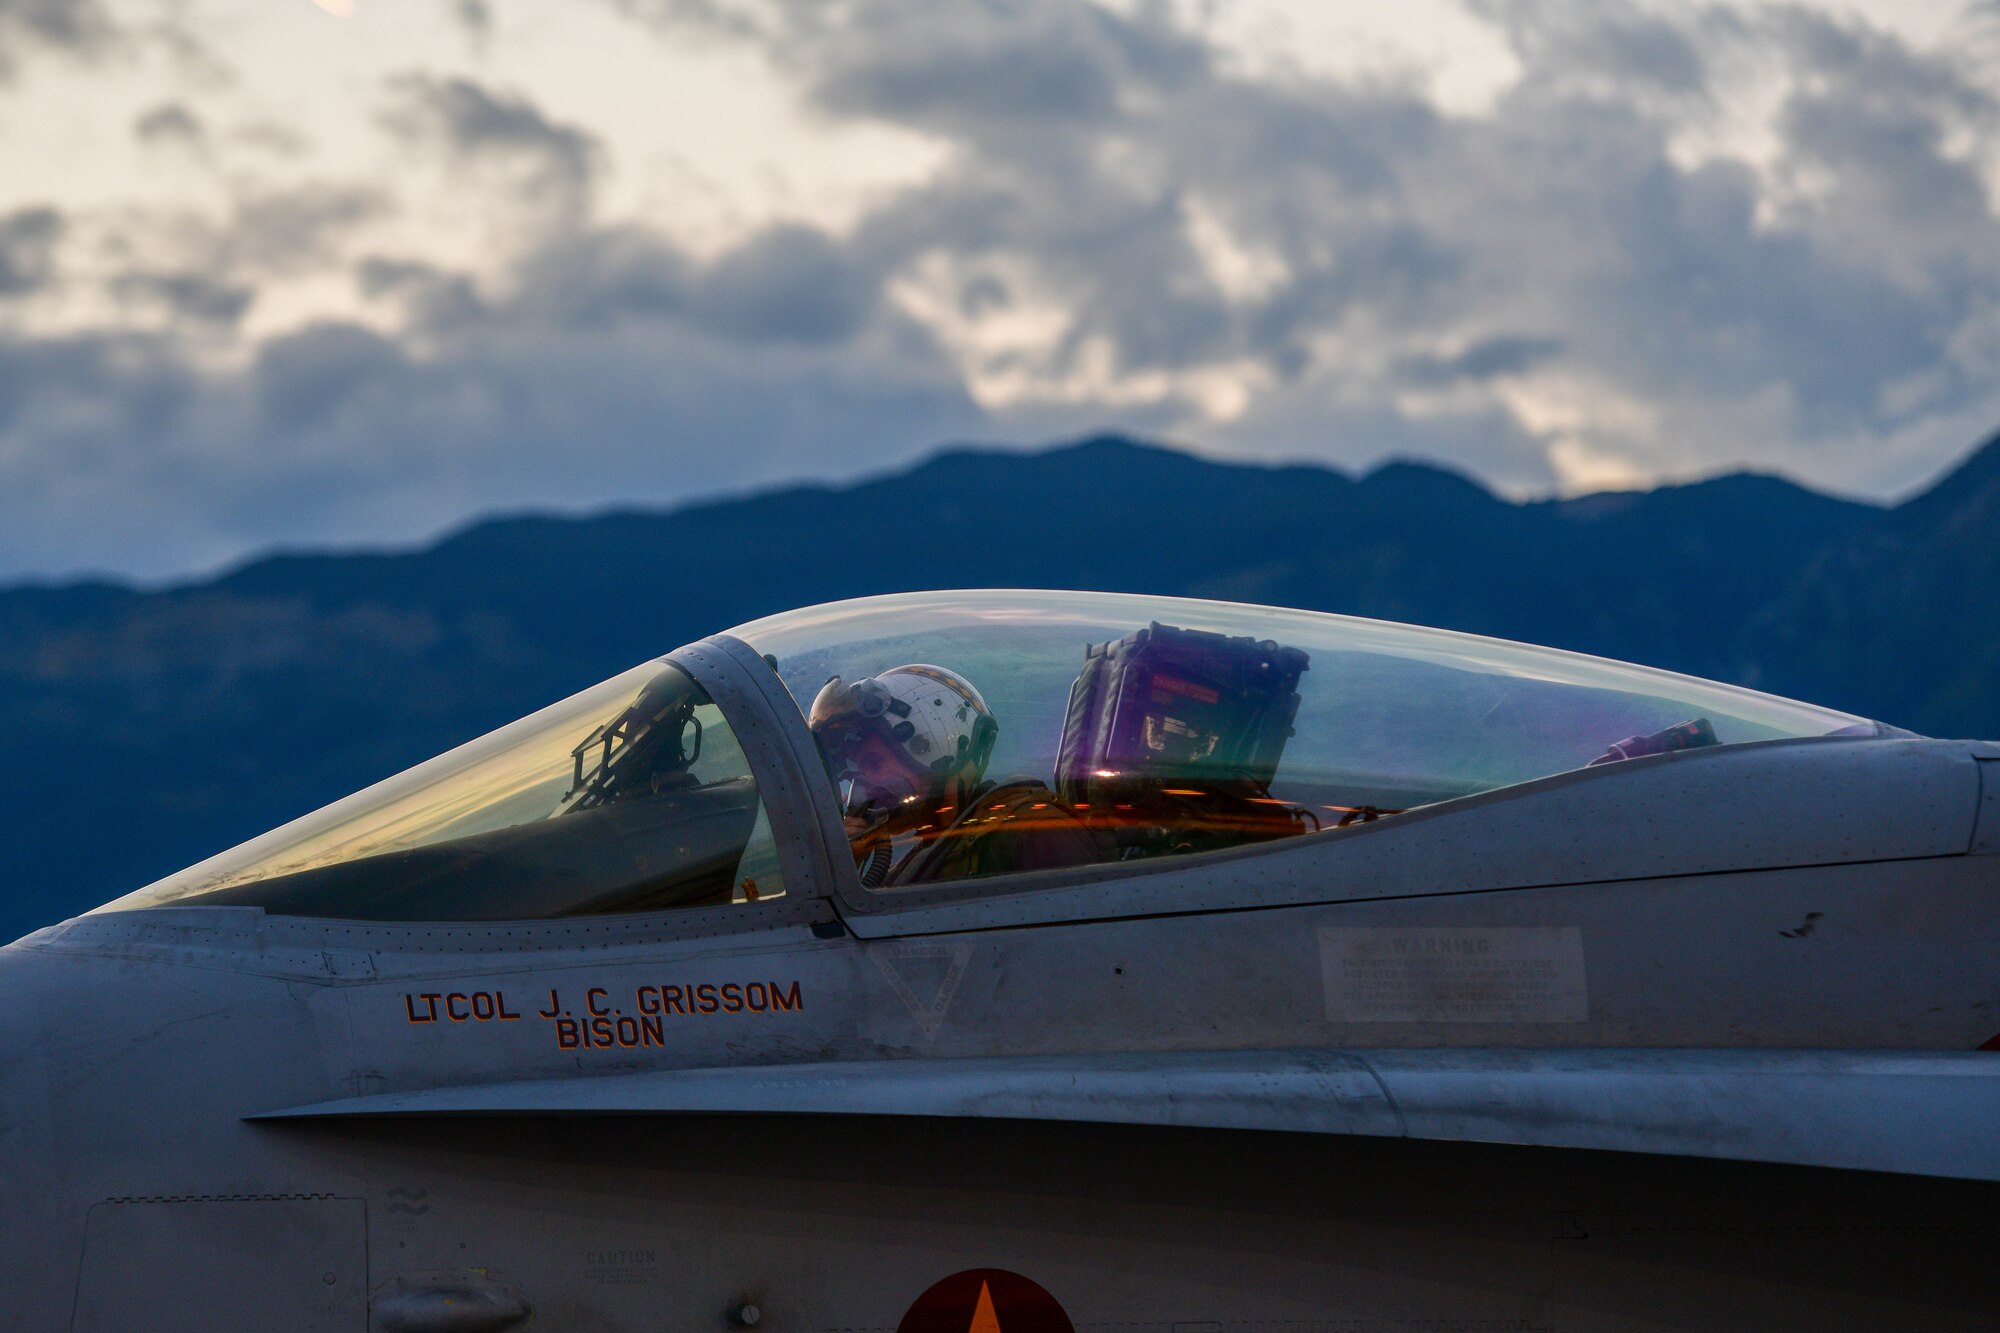 A United States Marine F/A-18 Hornet assigned to the Marine Fighter Attack Squadron 323 based out of Marine Corps Air Station Miramar, California, prepares for a training sortie at Aviano Air Base, Italy, Sept. 20, 2022. The VMFA-323 Squadron integrated with the 510th Fighter Squadron and practiced dogfighting, where one F-16 would be paired with one F-18 and whoever gets "gunned" loses. (U.S. Air Force photo by Senior Airman Brooke Moeder)